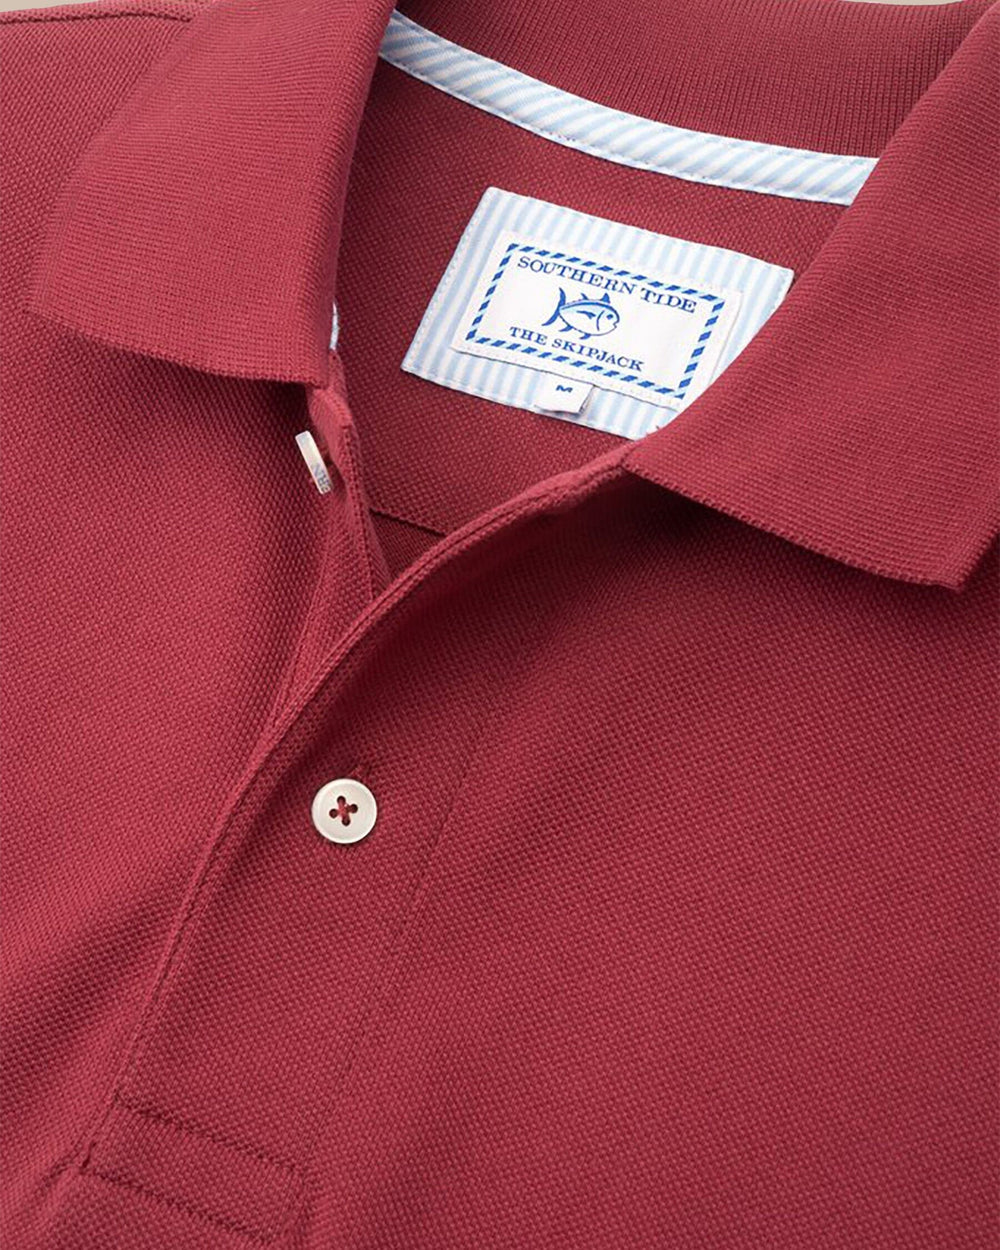 The detail view of the Men's Red Skipjack Gameday Colors Polo Shirt by Southern Tide - Chianti